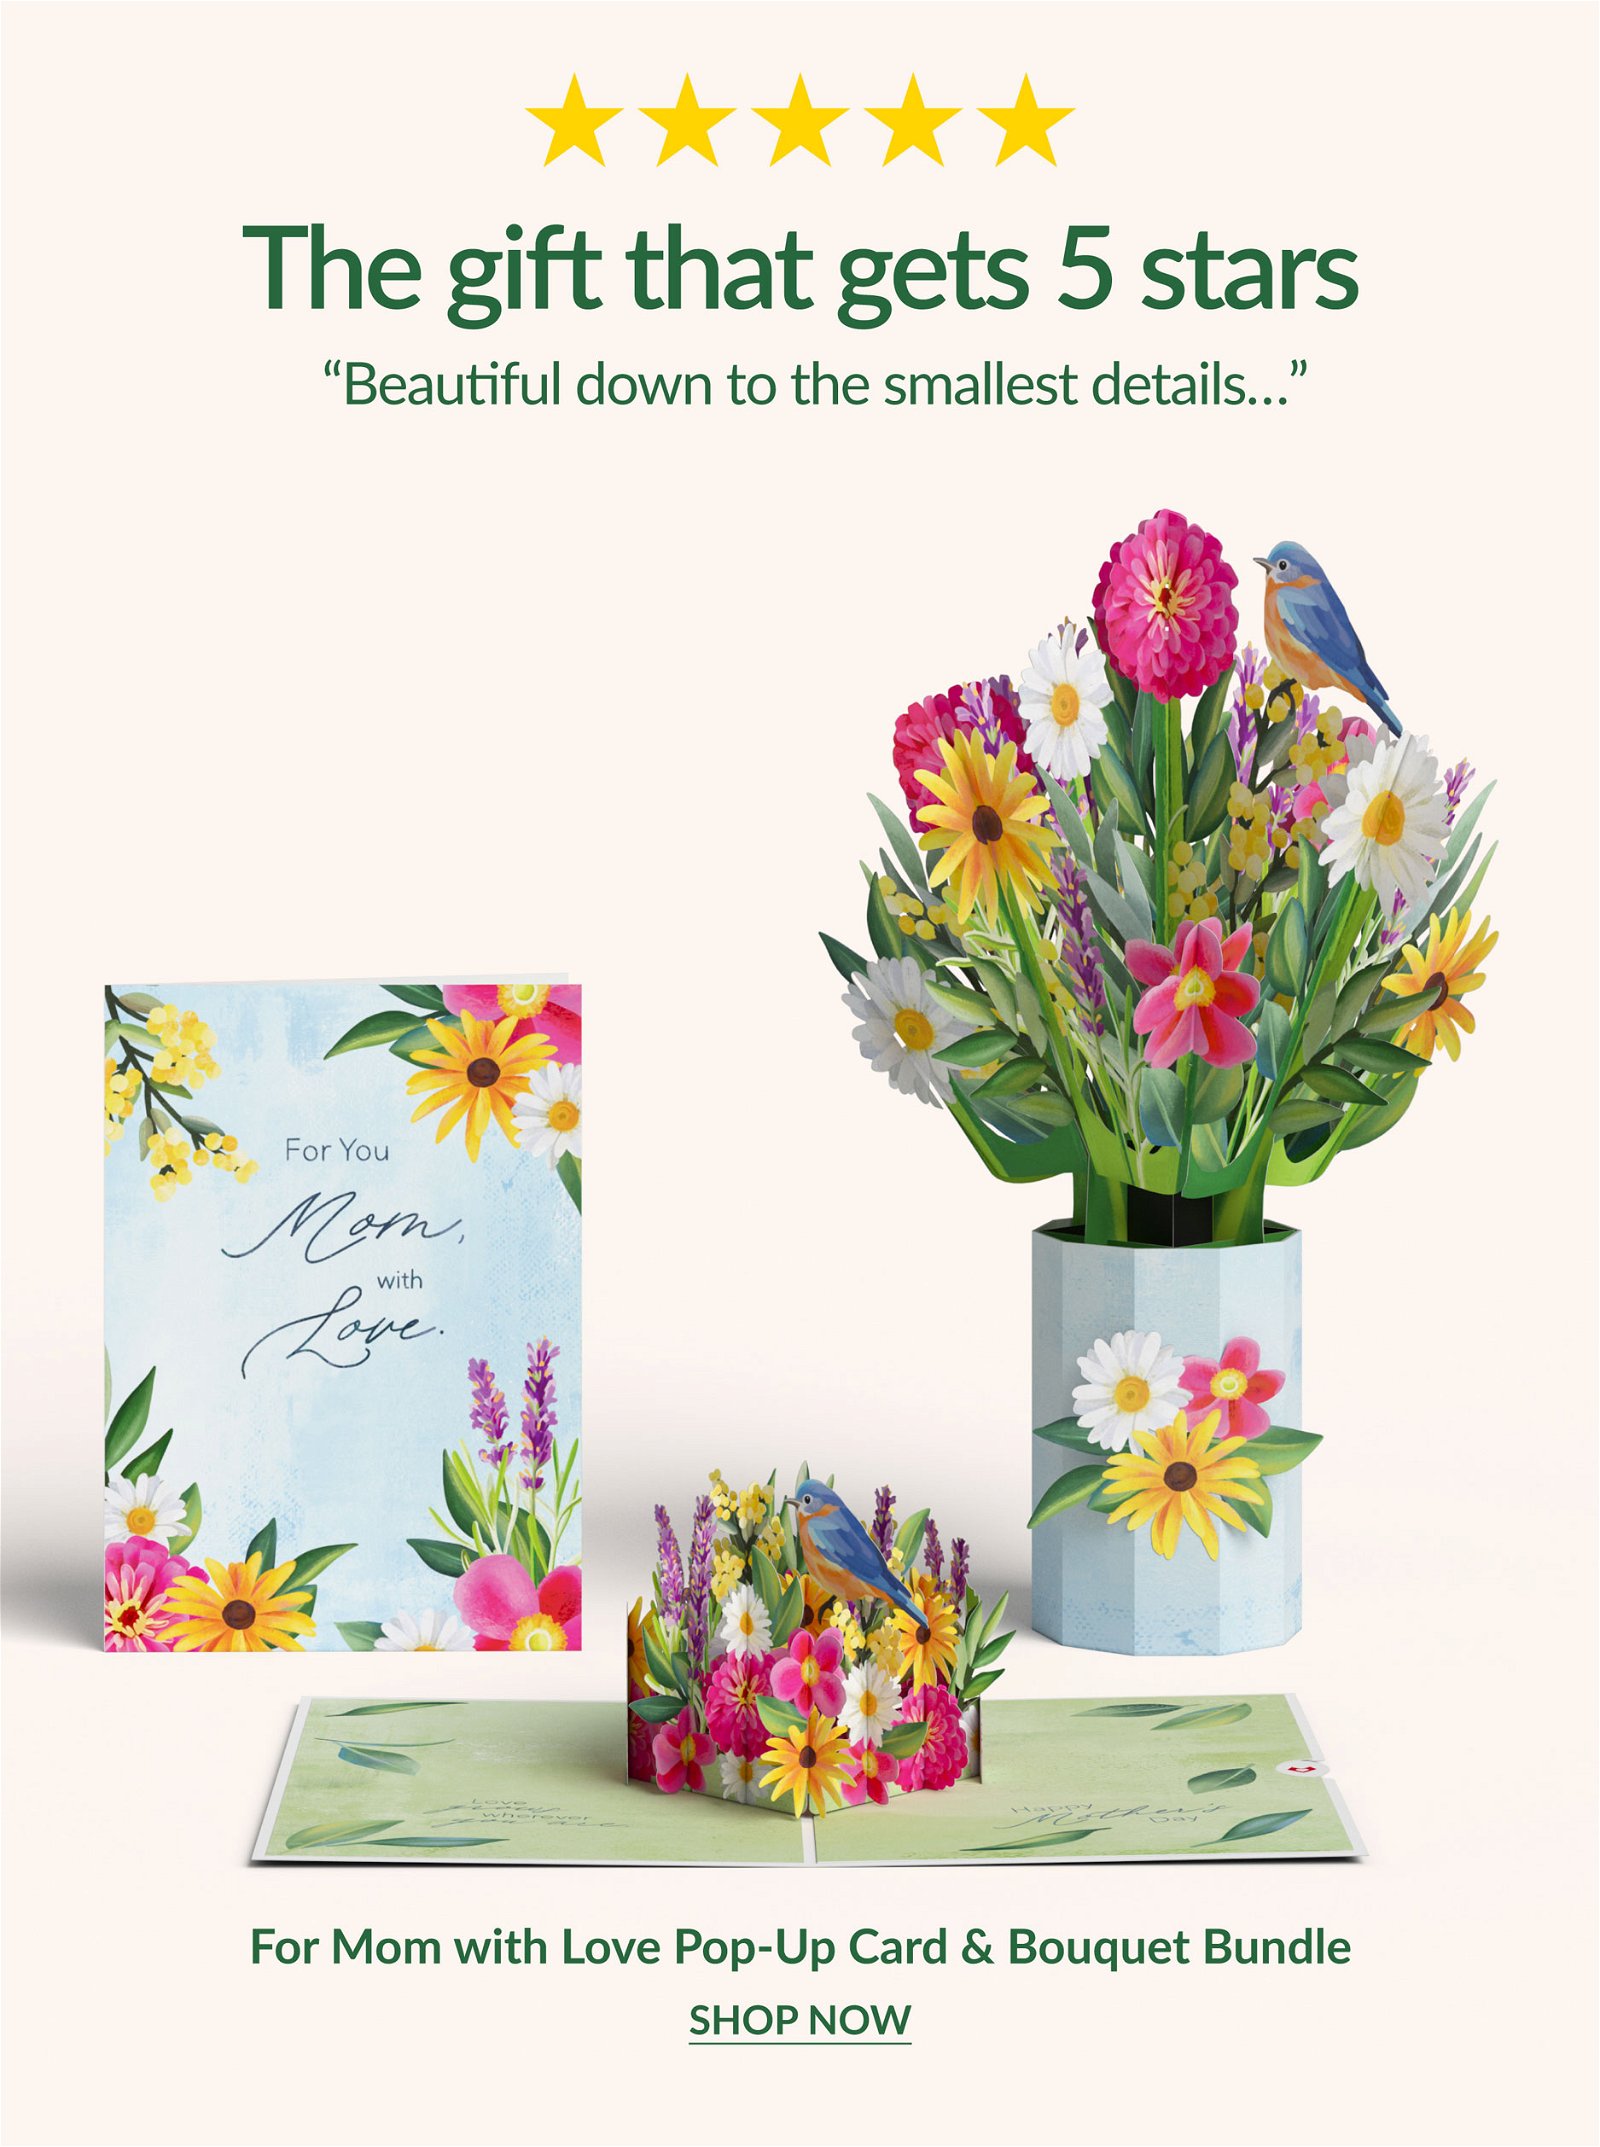 The gift that gets 5 stars | For Mom with Love Pop-Up Card & Bouquet Bundle | SHOP NOW